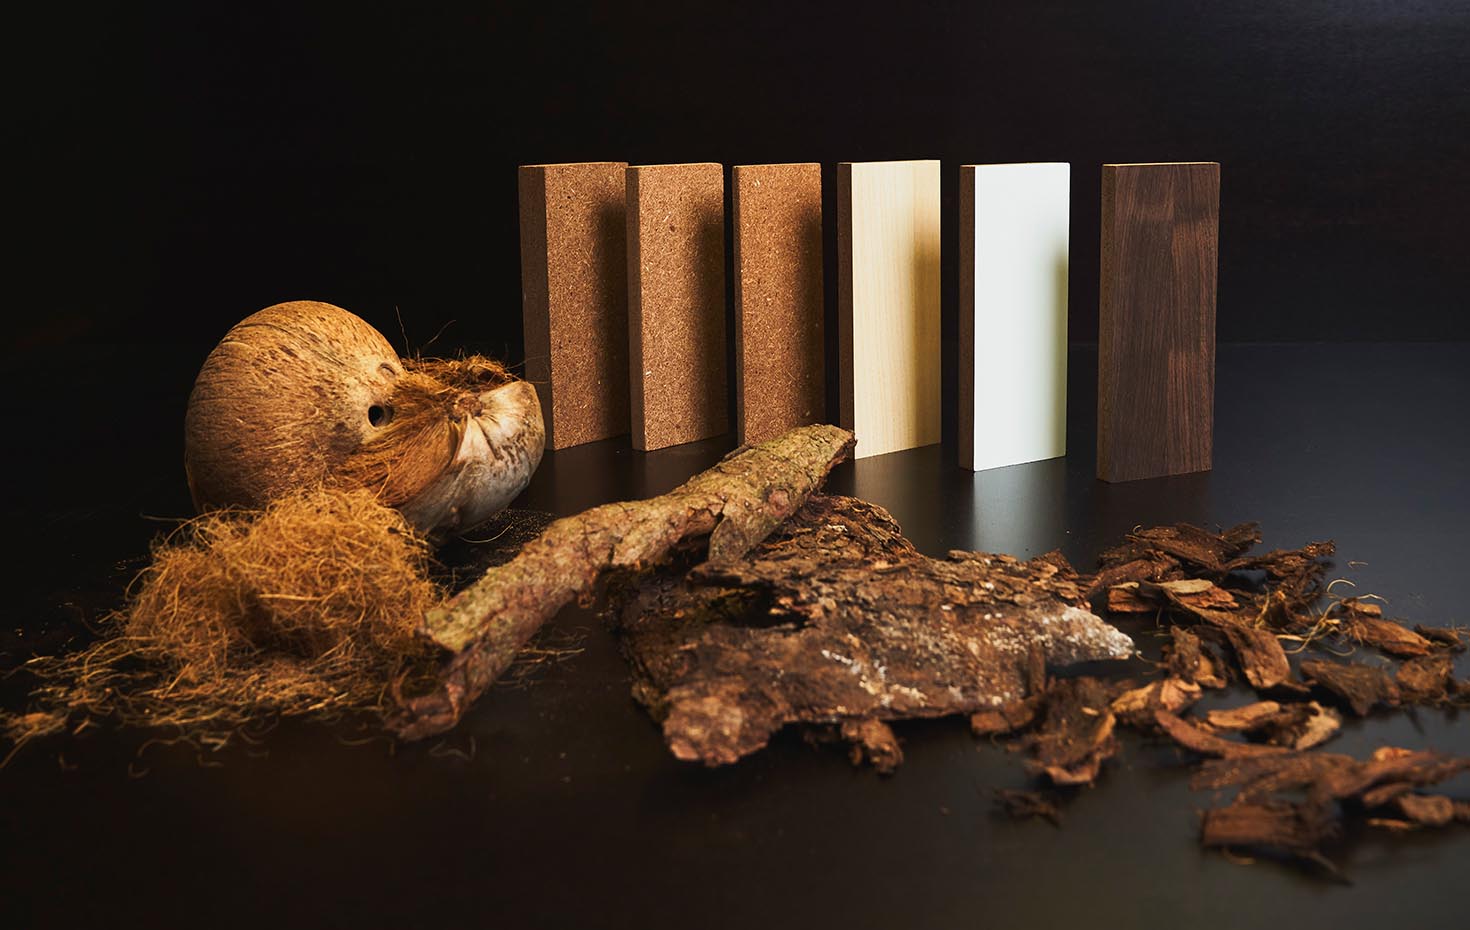 Cocoboard sustainable materials